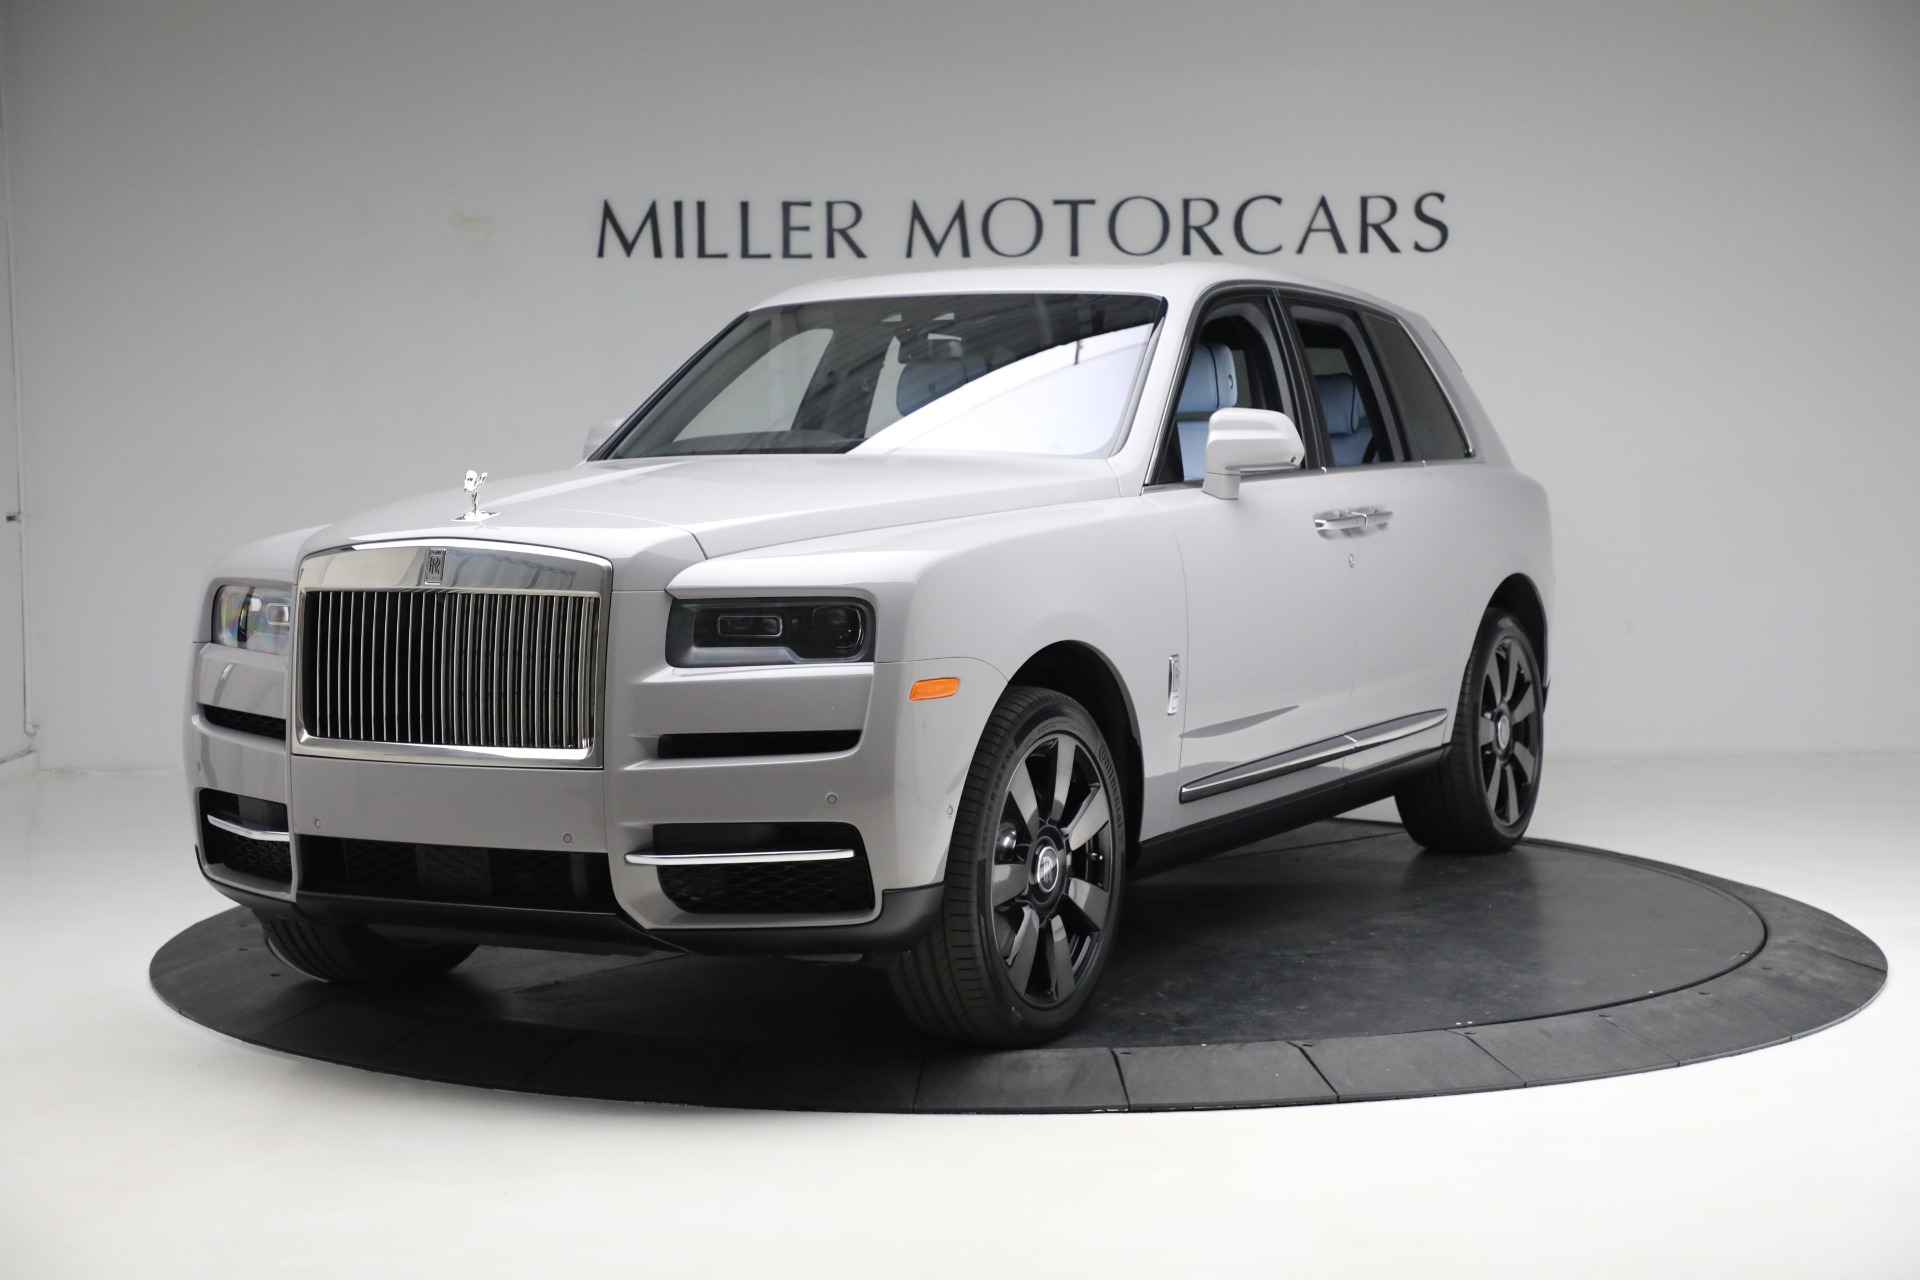 2023 RollsRoyce Phantom  News reviews picture galleries and videos   The Car Guide